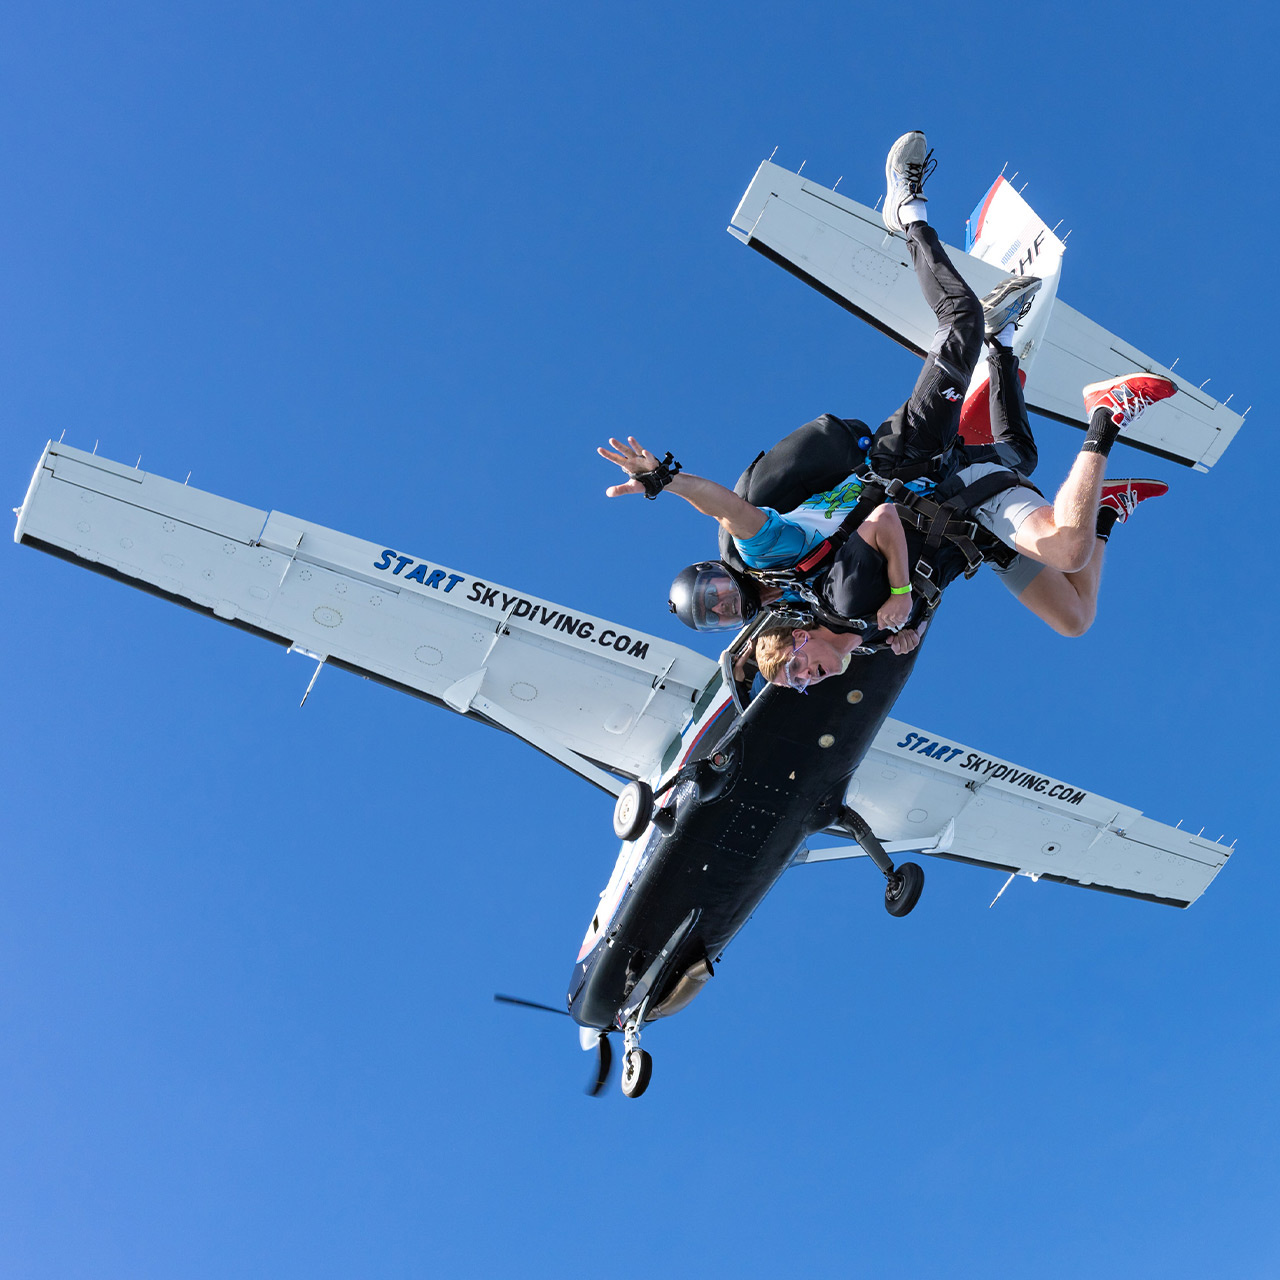 Excited tandem student and instructor exiting the aircraft during skydiving in Cincinnati